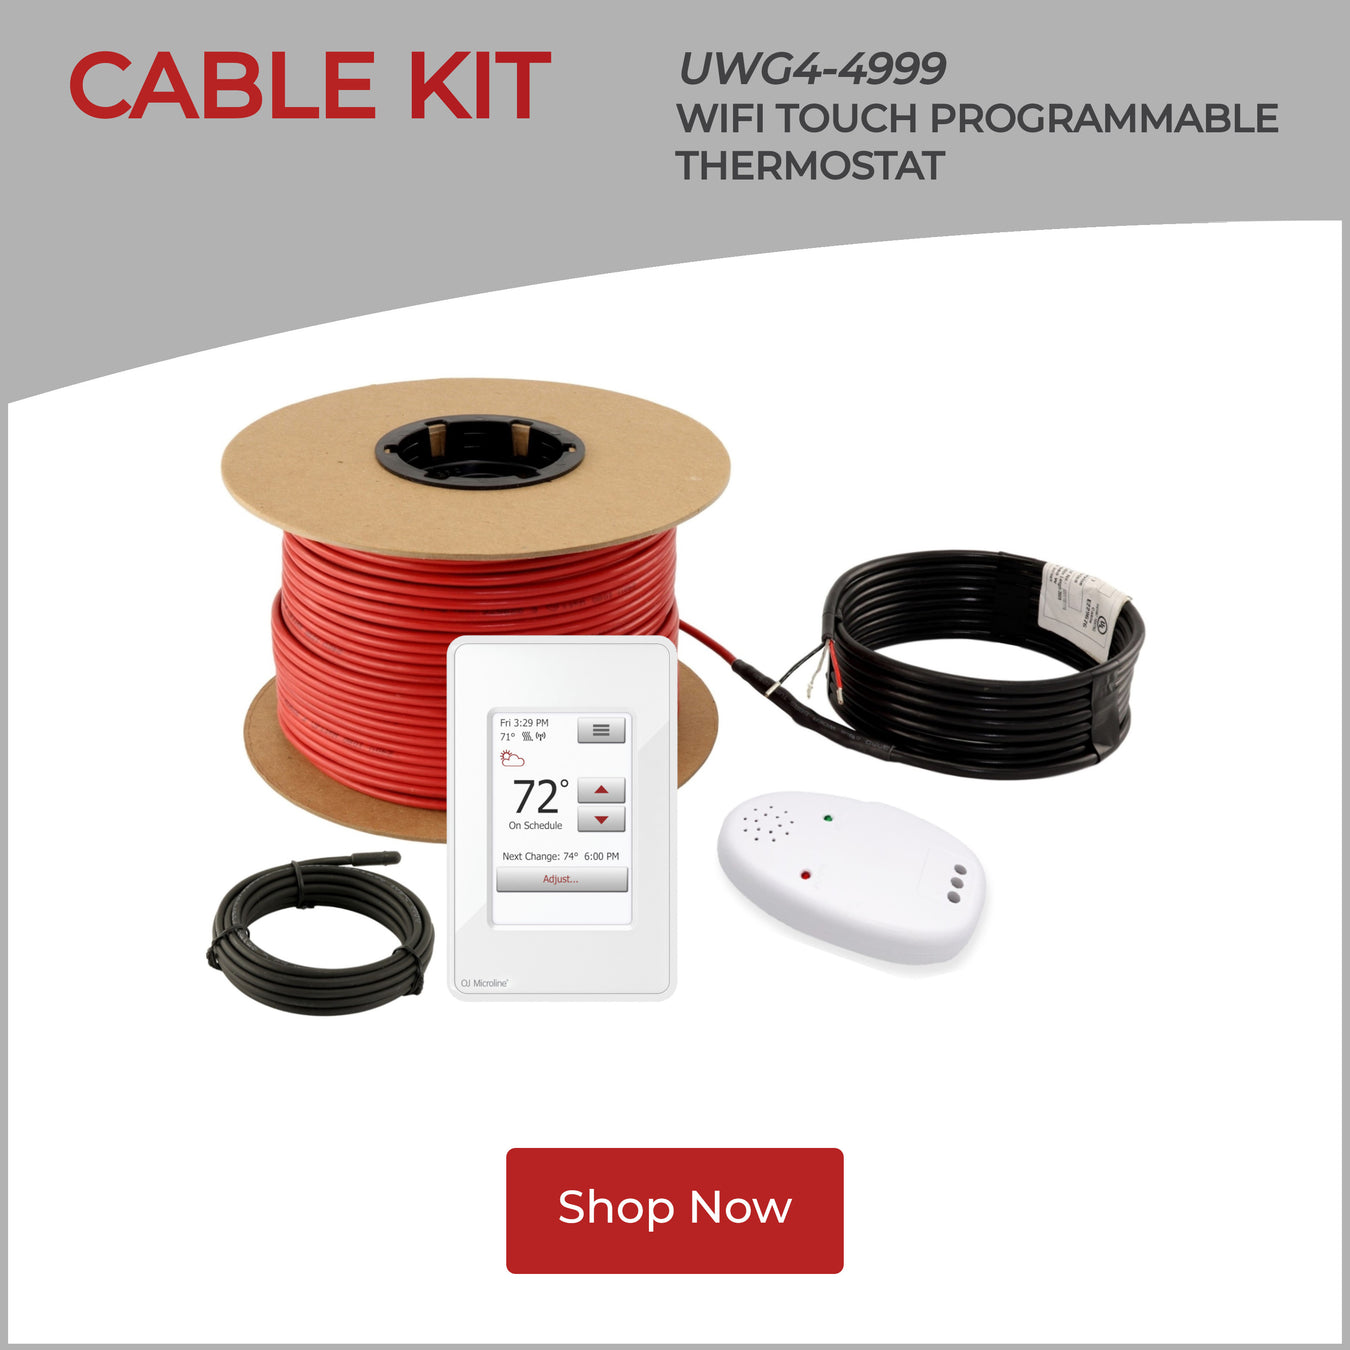 Overview_-_Cable_Kit_with_UWG4